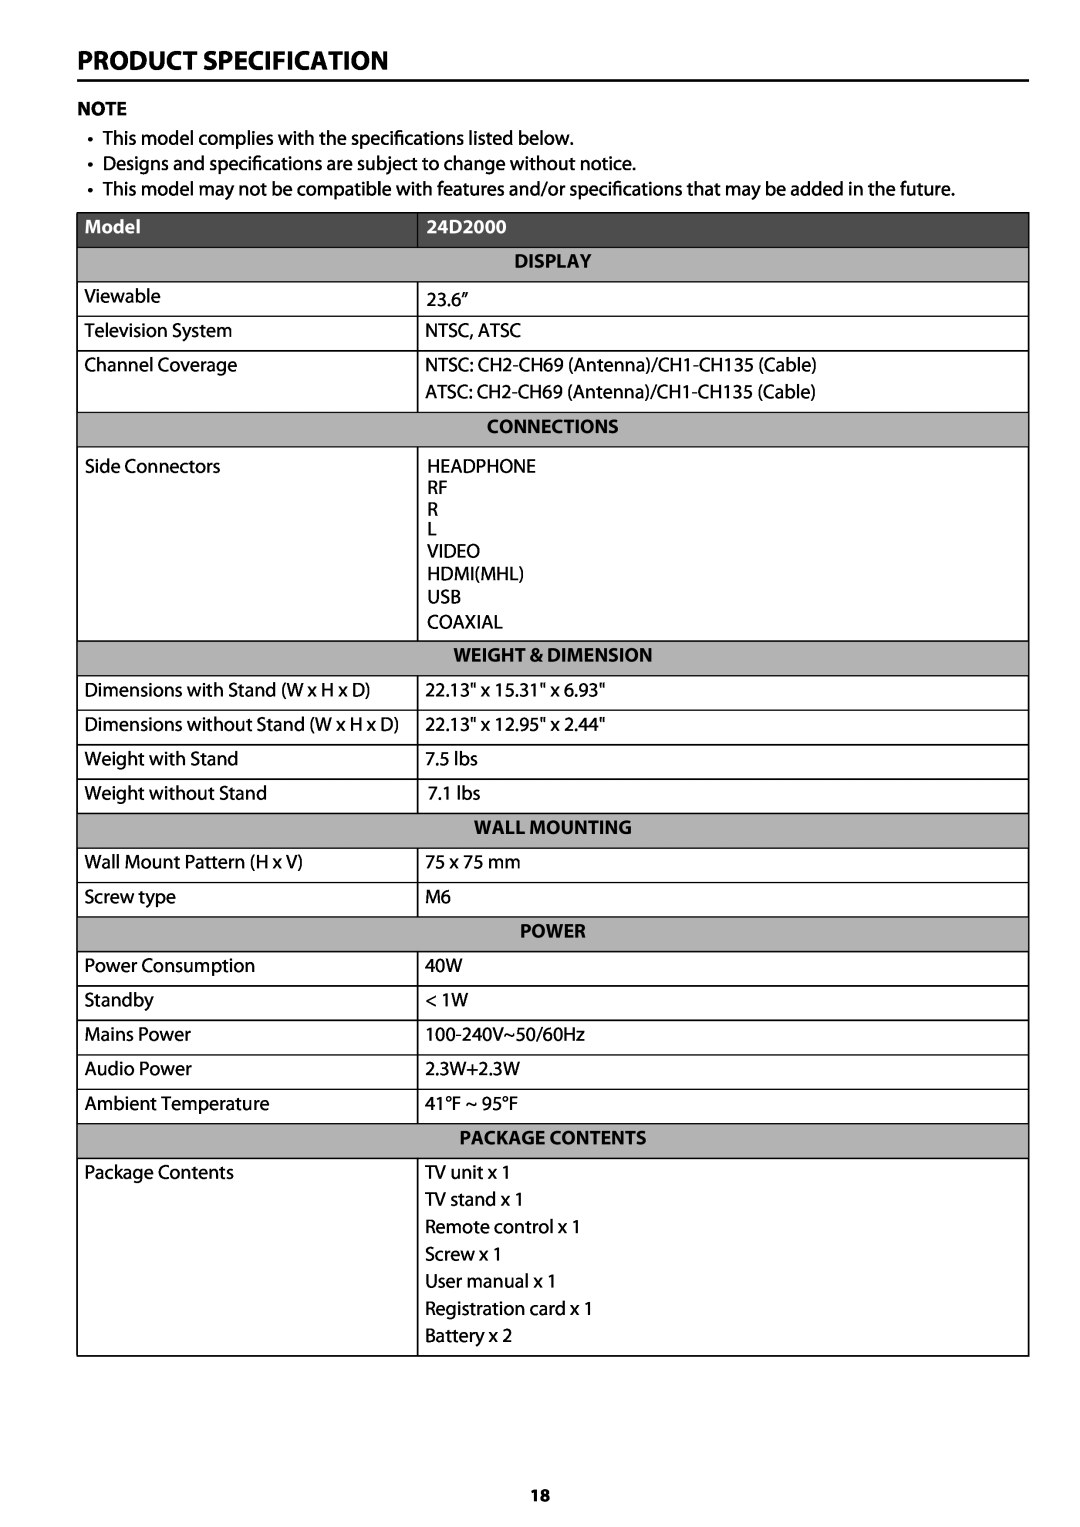 Haier 24D2000 manual Product Specification, Model, Display, Connections, Weight & Dimension 